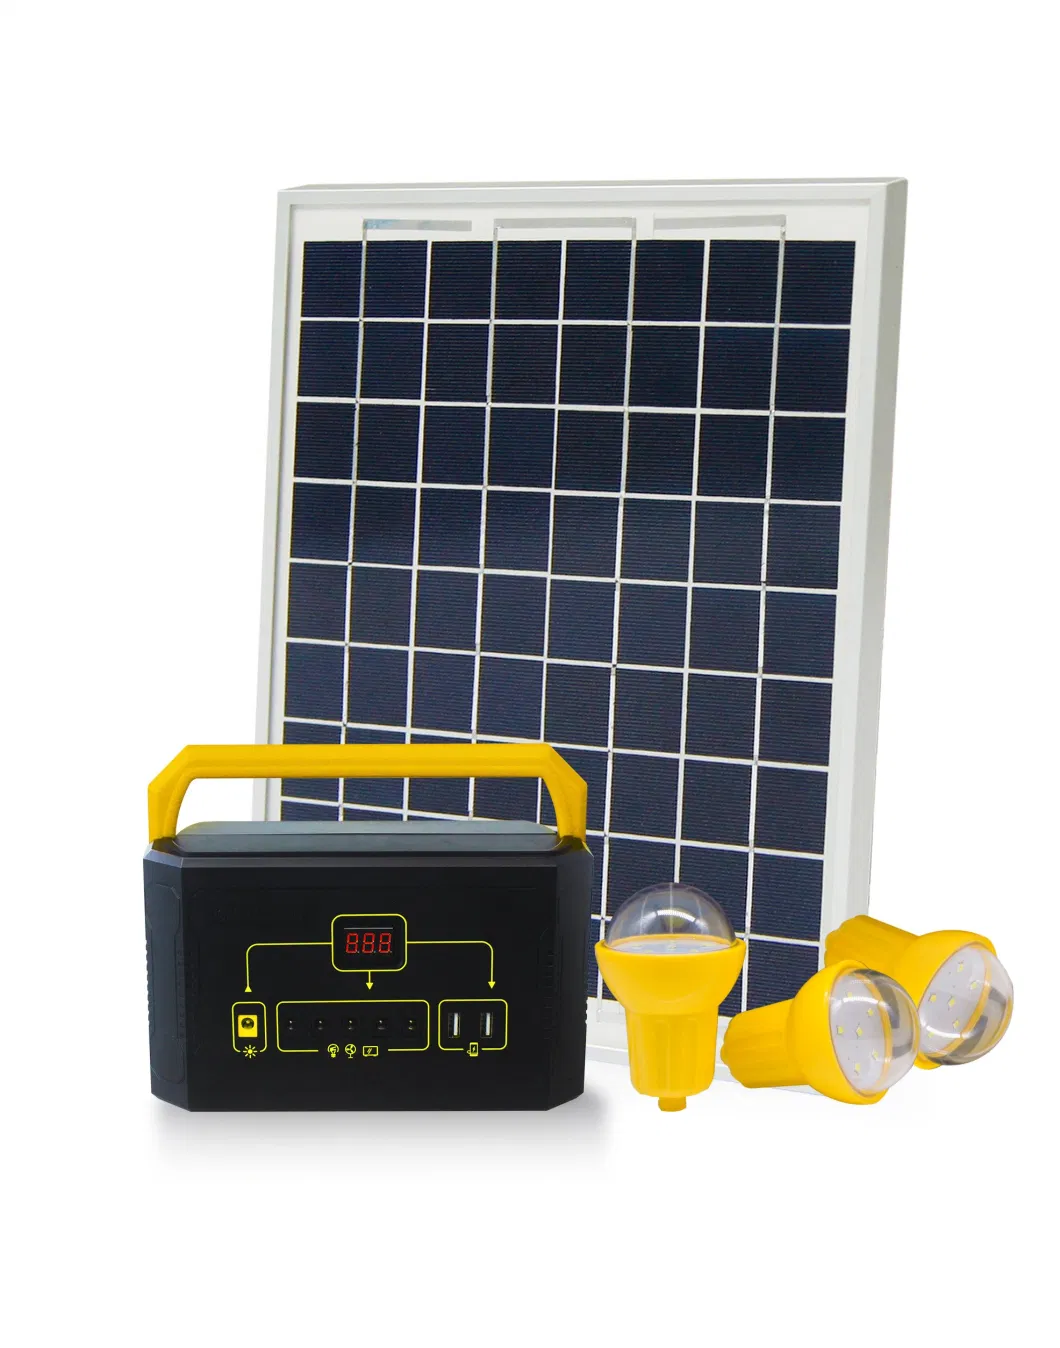 The Solar Clean Energy with Large Battery Can Continuously Supply Power to The Home, You Can Watch TV and Enjoy The Cold Wind, Charge Your Mobile Phone, 3 Bulbs